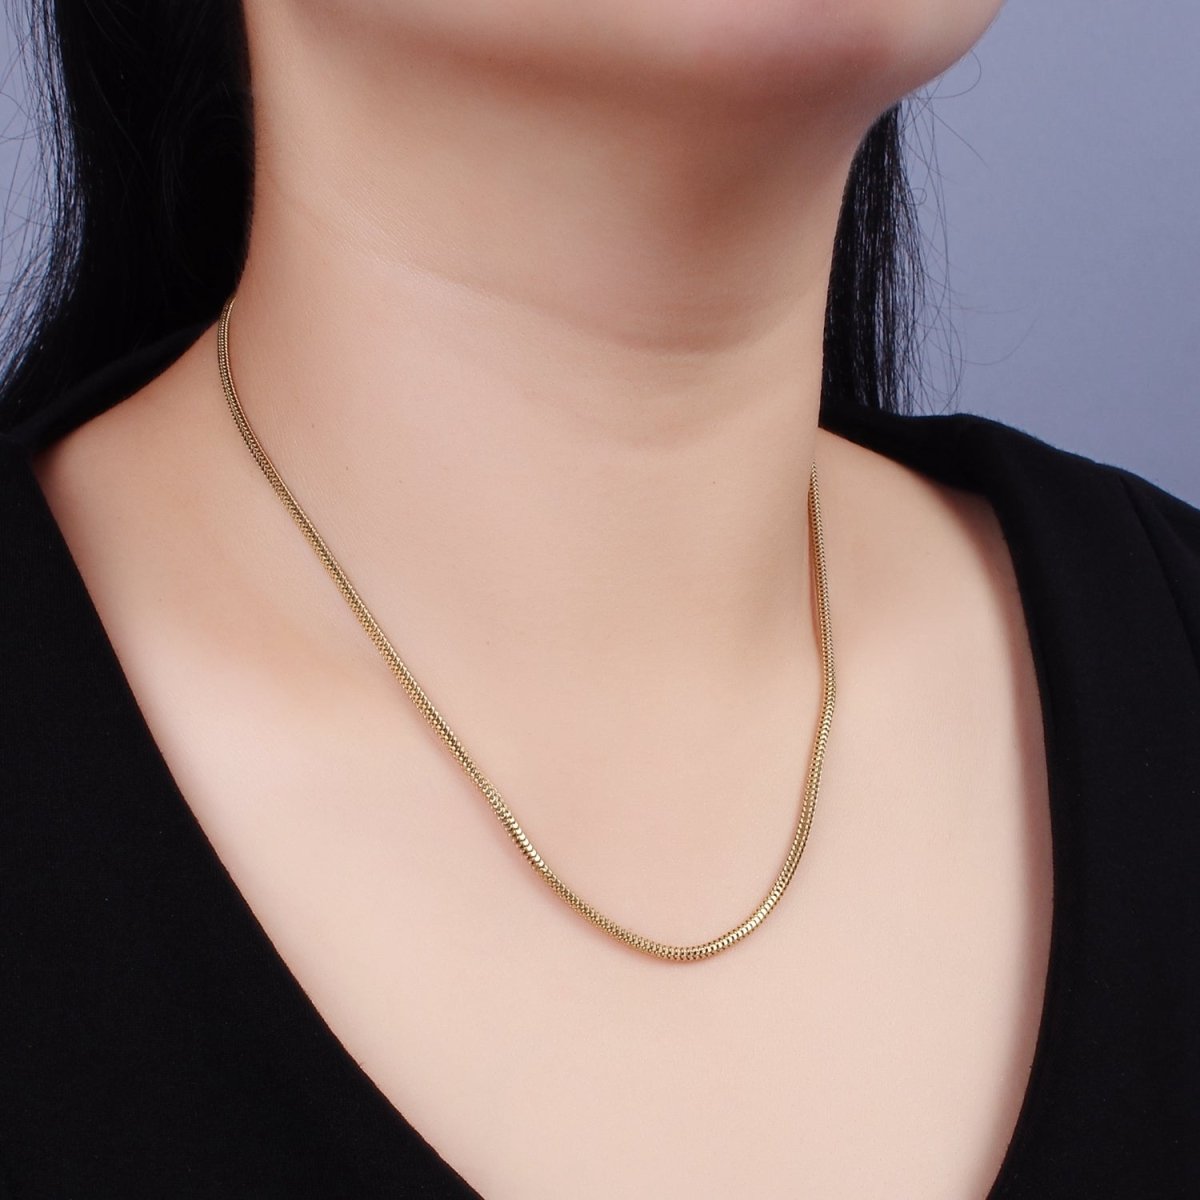 Stainless Steel 2mm Herringbone Cocoon Snake Chain 18 Inch Necklace | WA-2356 - DLUXCA